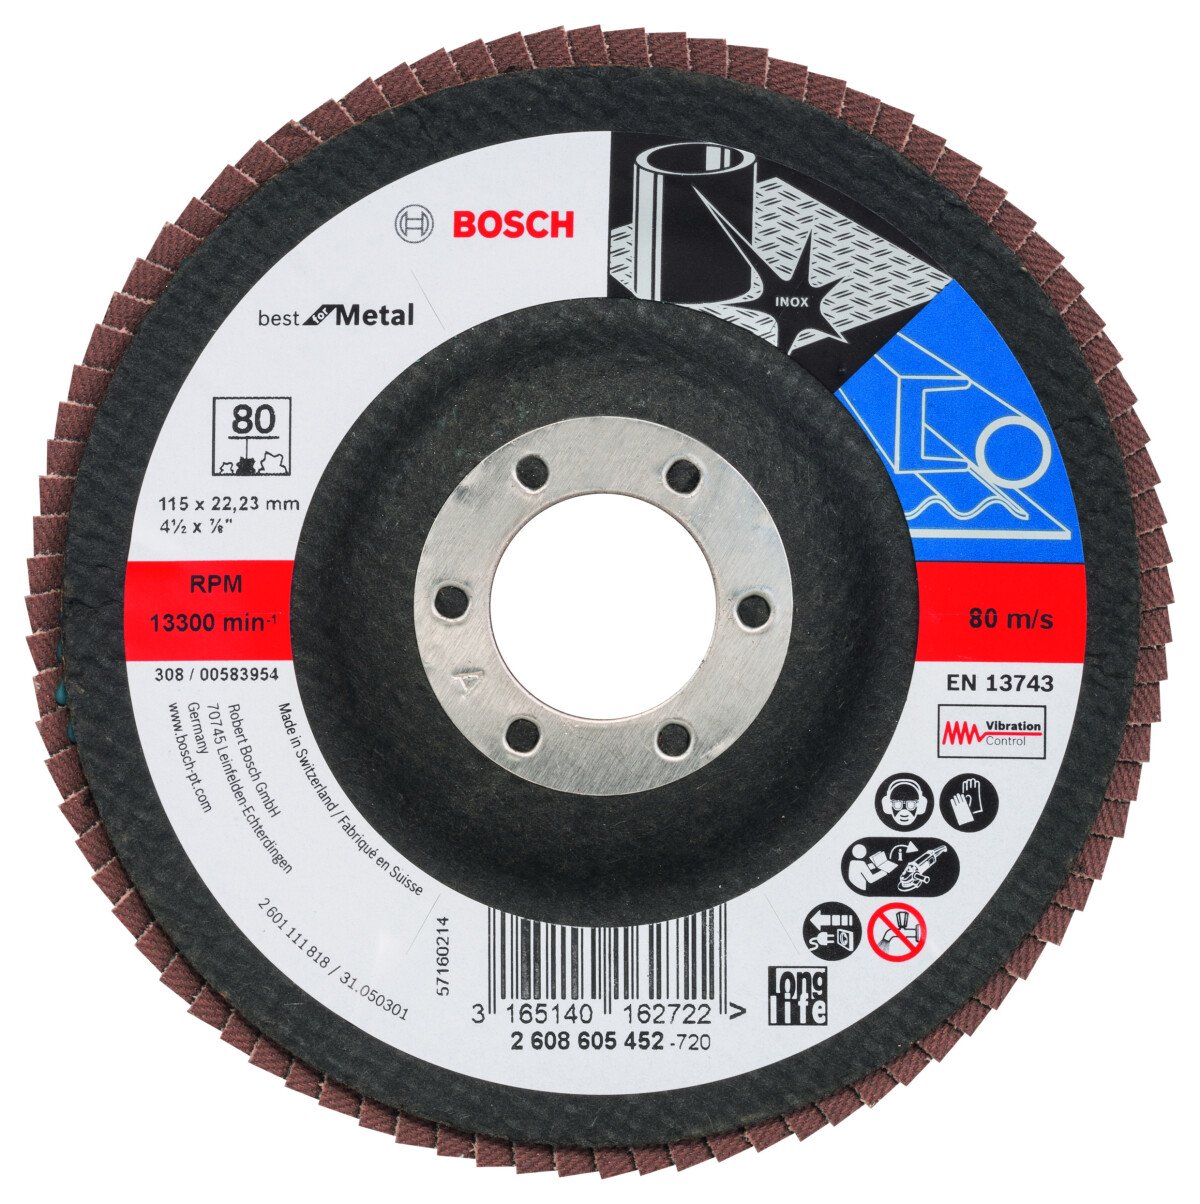 Bosch 2608605452 Flap Sanding discs for Angle Grinders . 115x22 G80